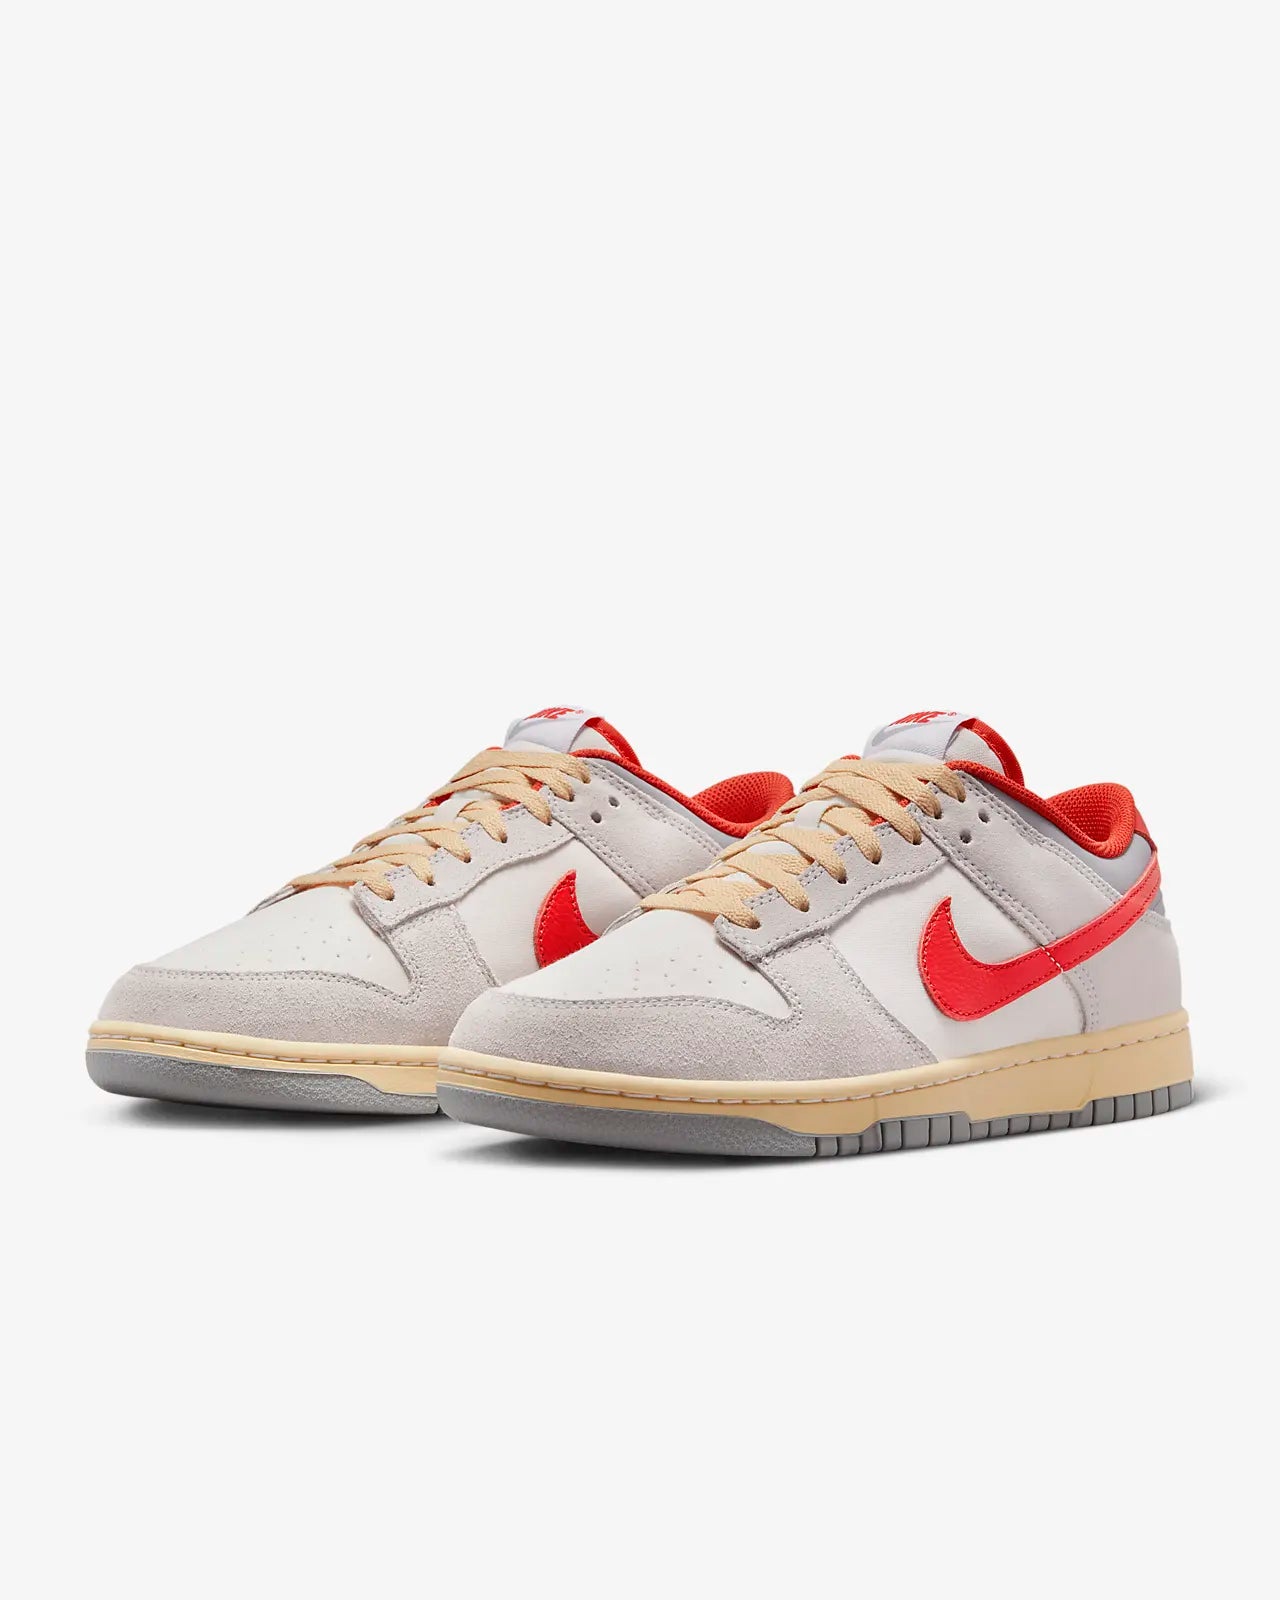 Nike - Dunk Low SE - ‘85 Athletic Department